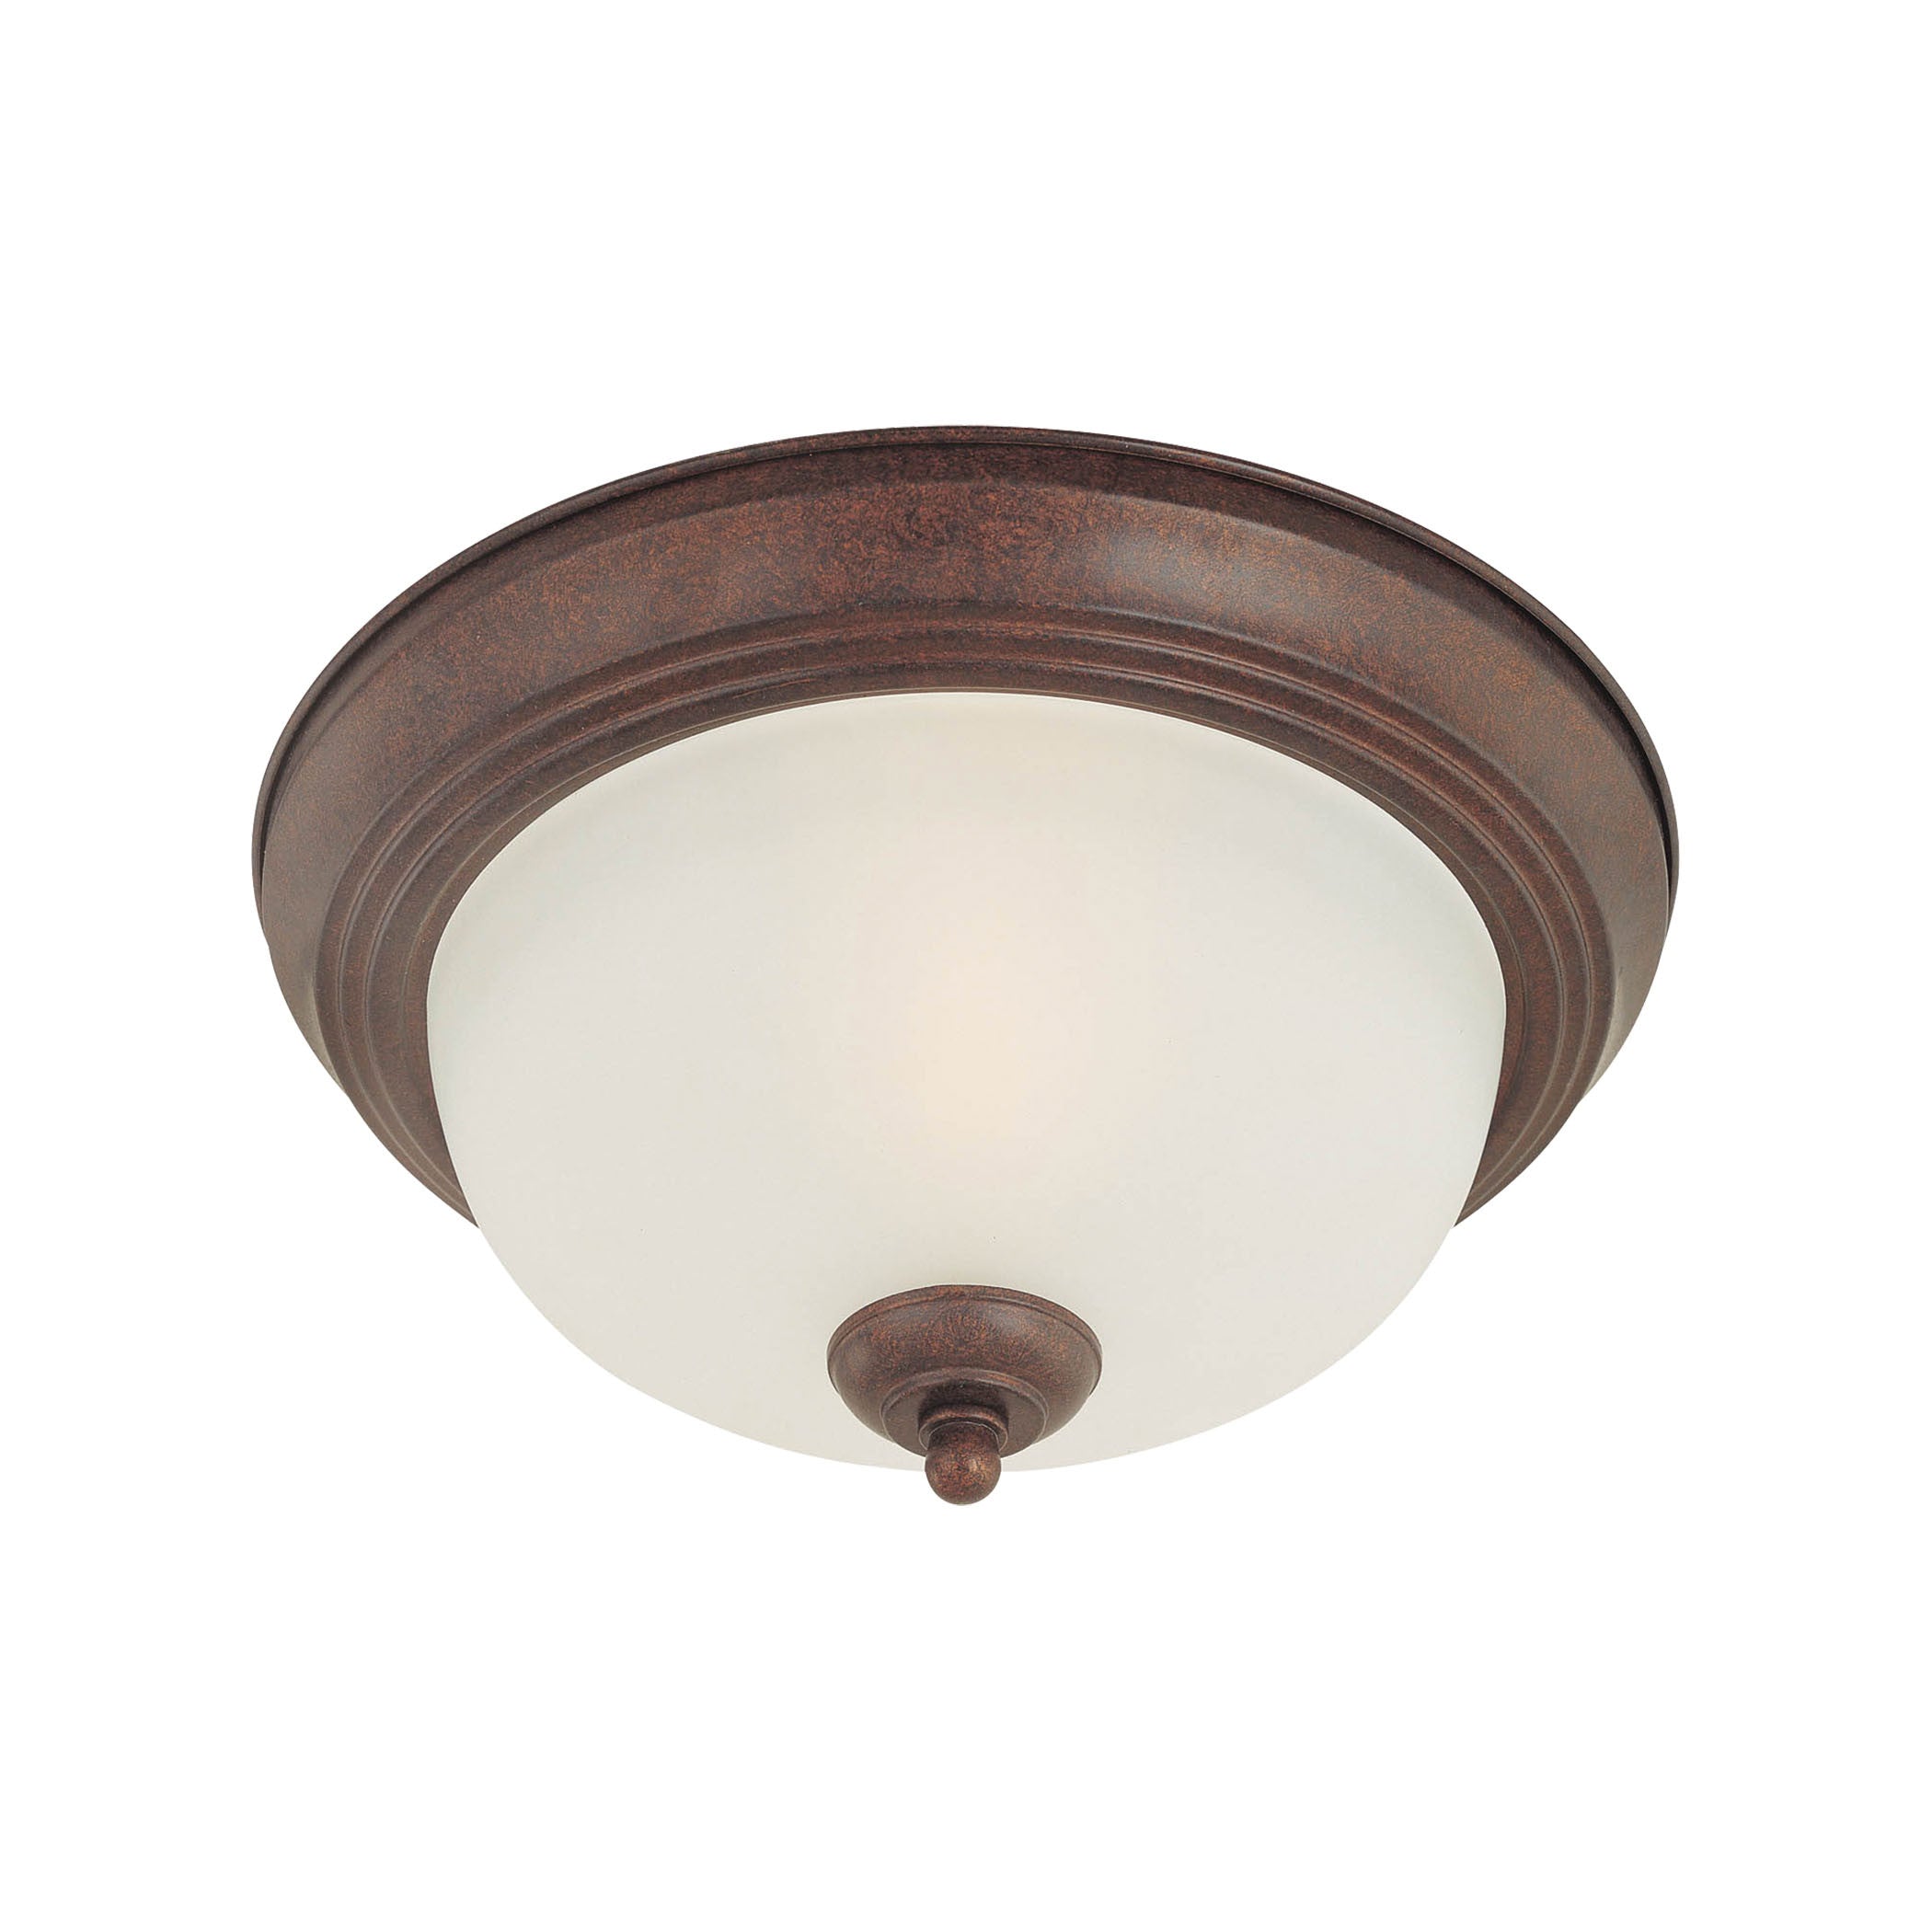 Thomas Lighting Sl878223 Essentials Collection Colonial Bronze Finish Transitional Flush